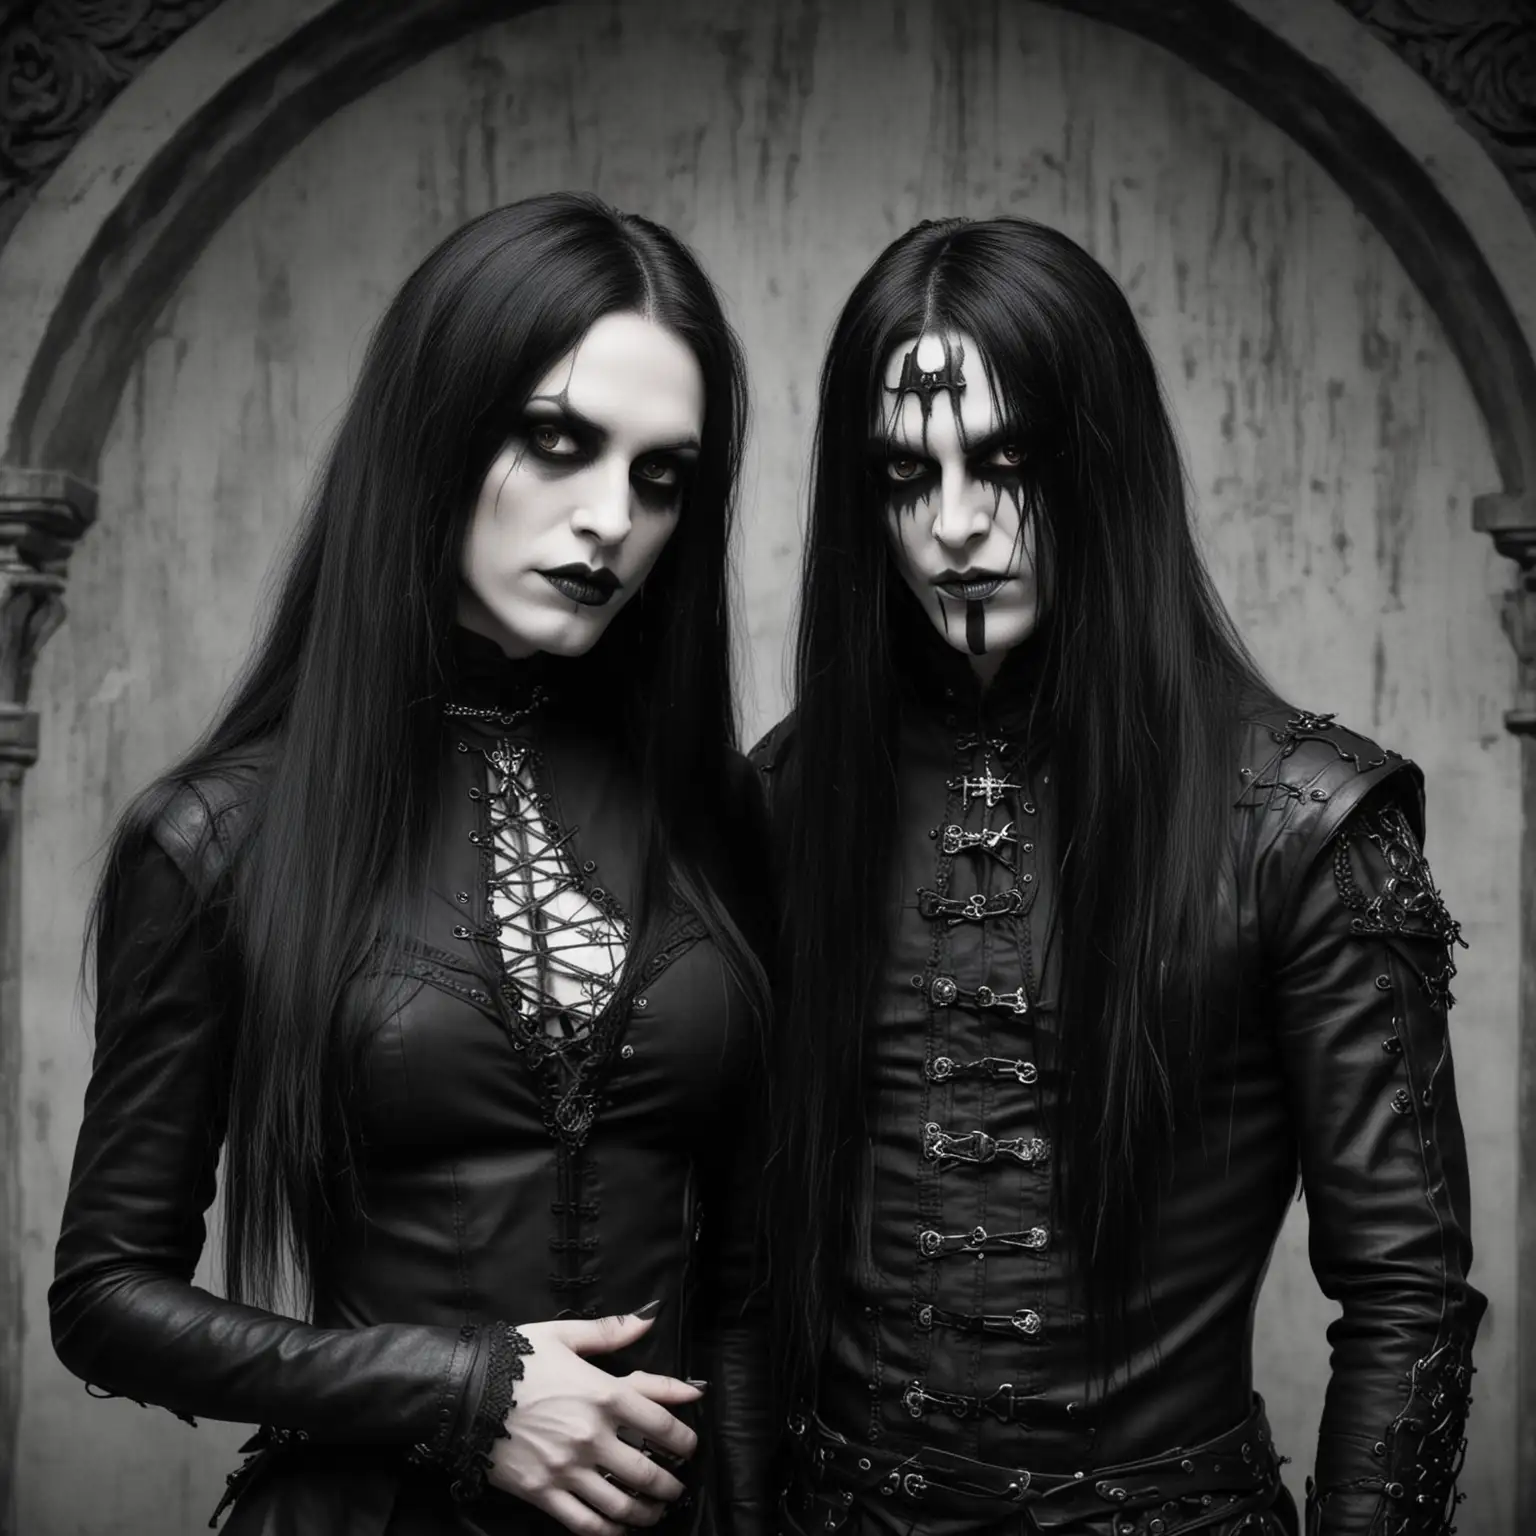 Dark Metal Couple Gothic Man and Woman Embrace in BDSM Aesthetic